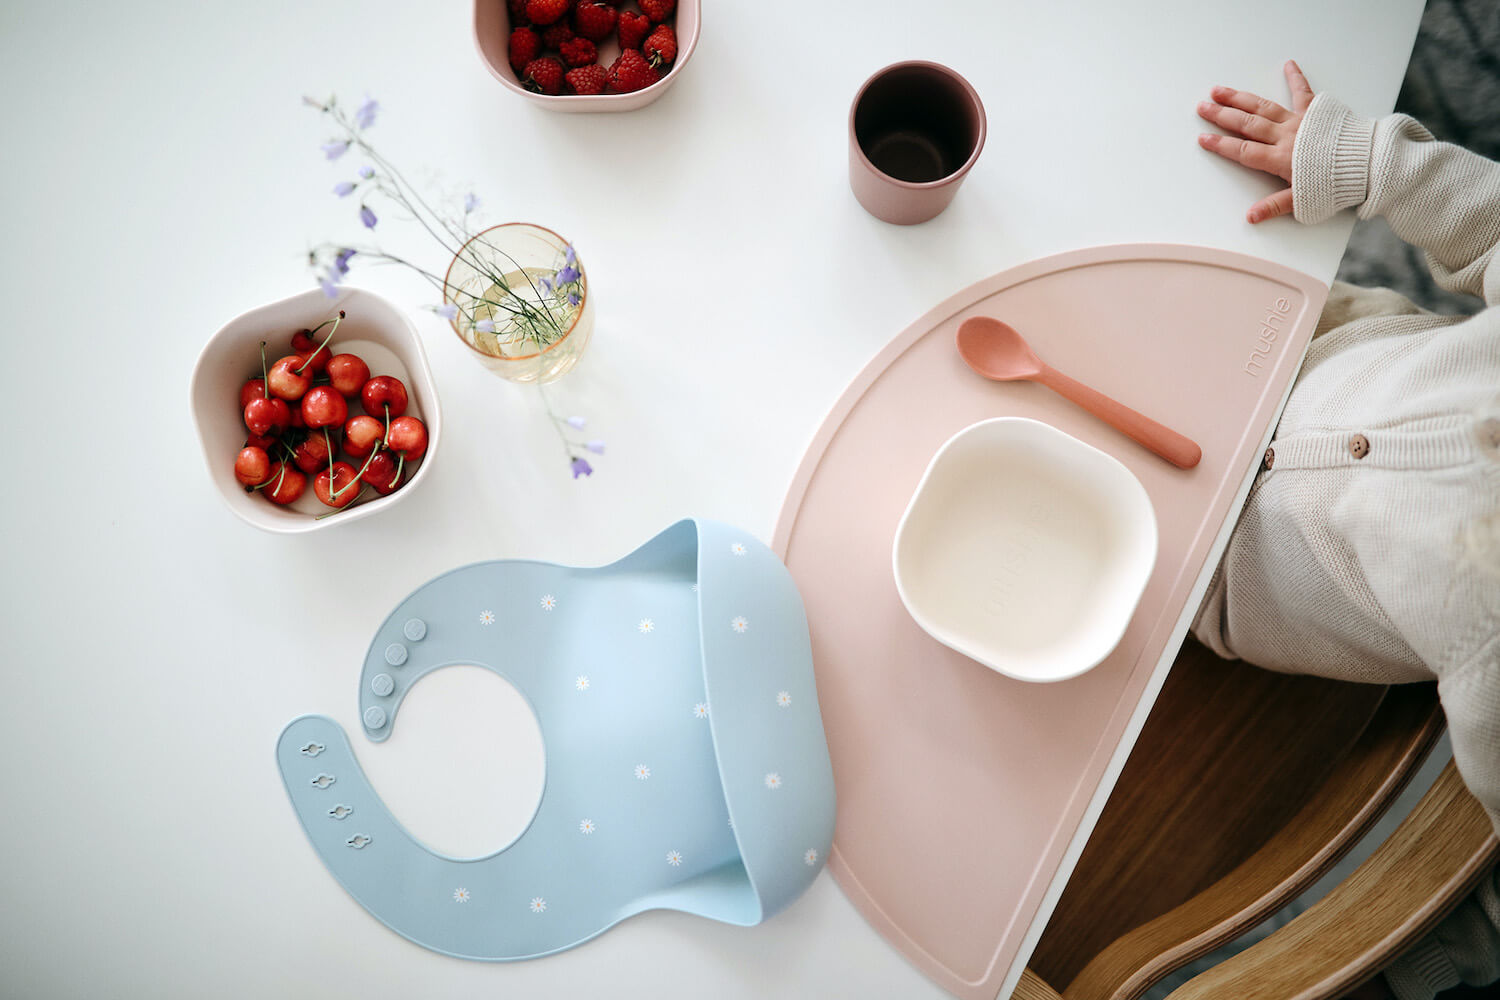 Mushie Silicone Place Mat Pink Confetti | lincolnstreetwatsonville